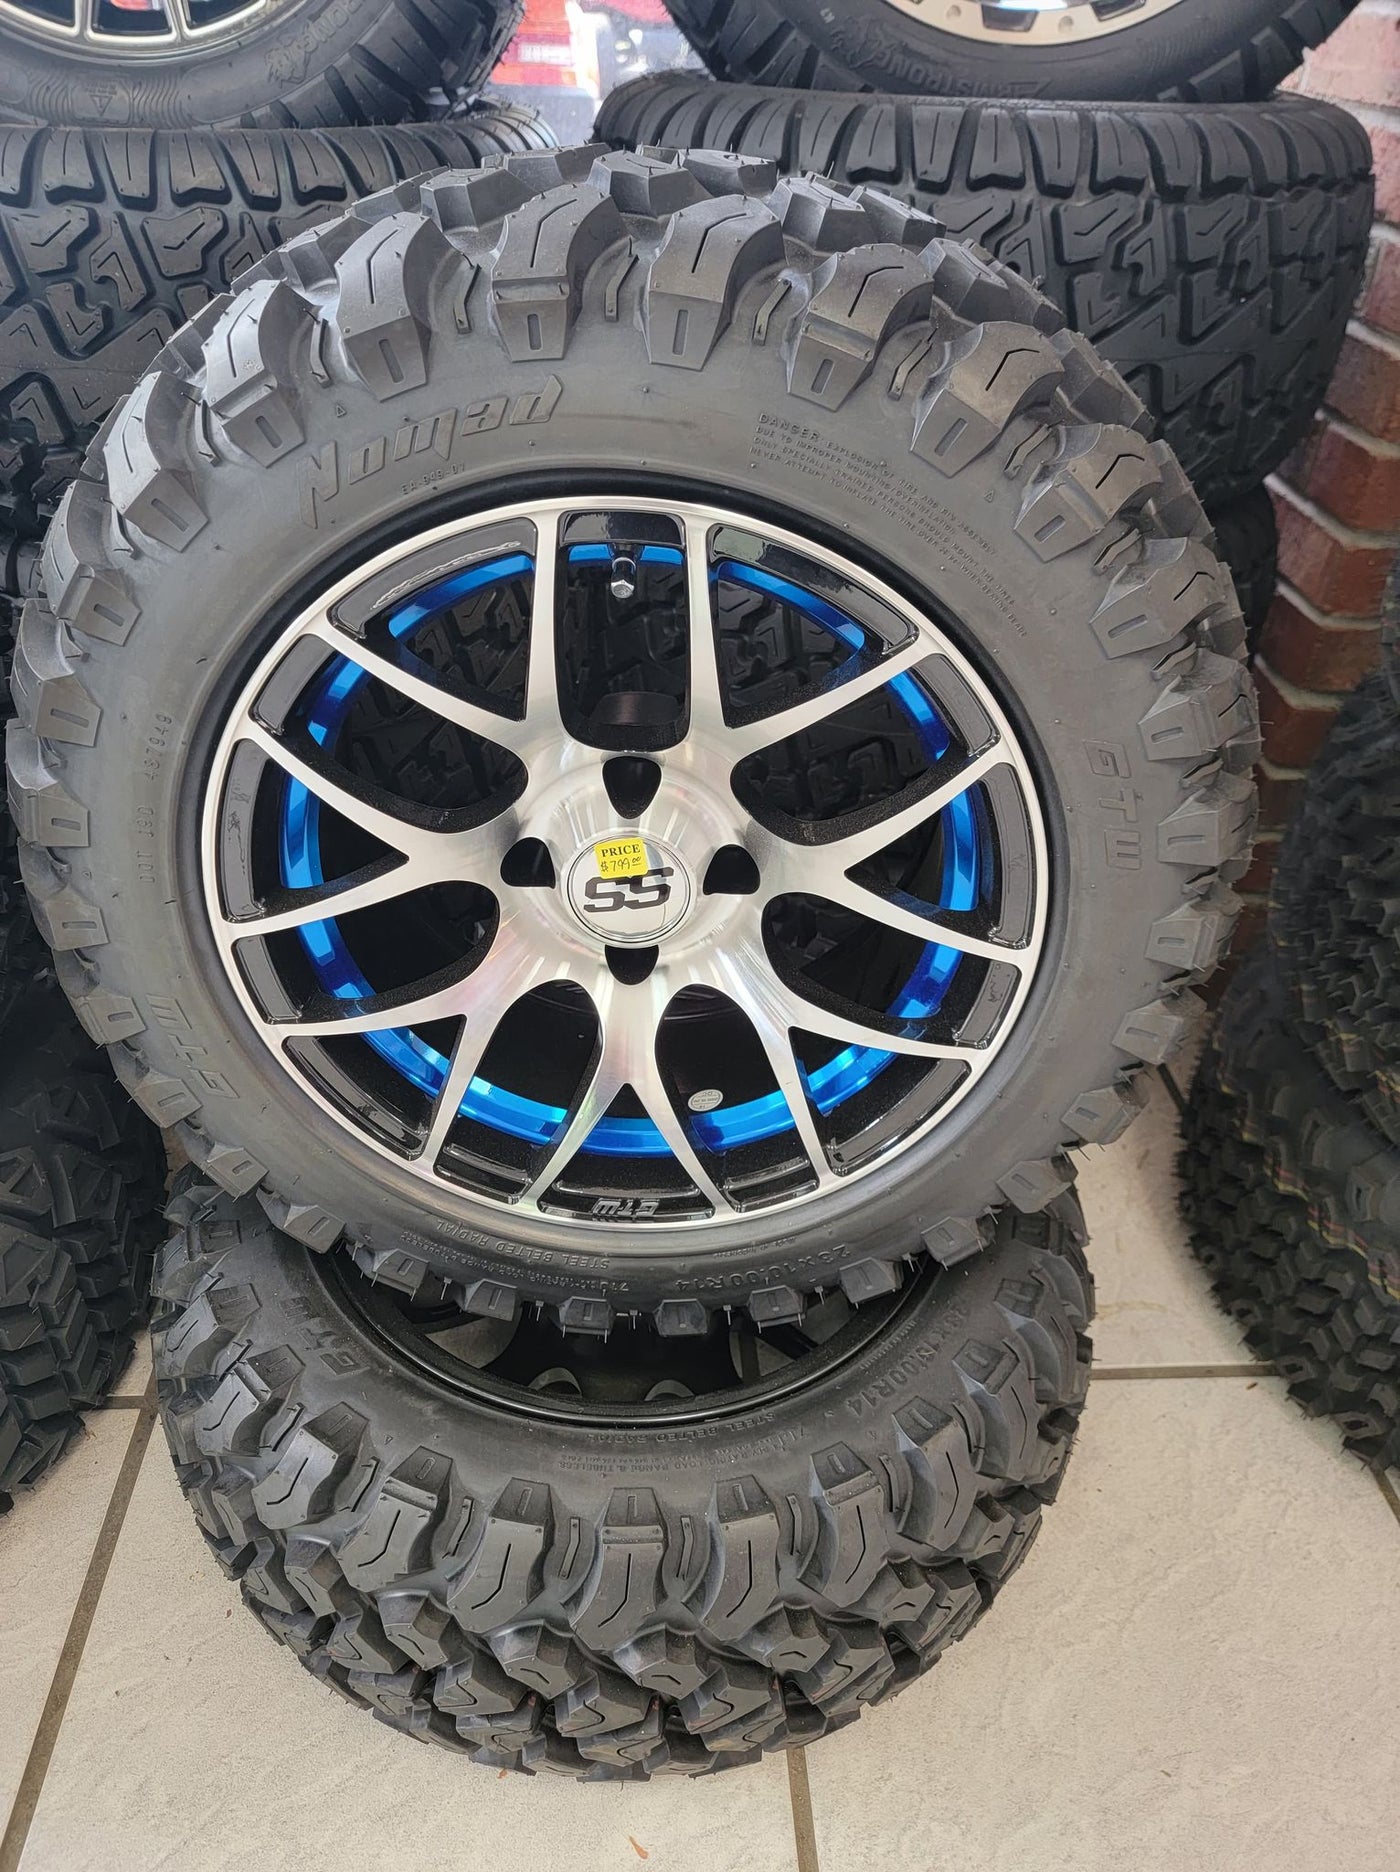 GOLF CART 14" GTW PURSUIT BLUE WHEELS ON 14x23" NOMAD ALL TERRAIN TIRES (SET OF 4) optional Lugs